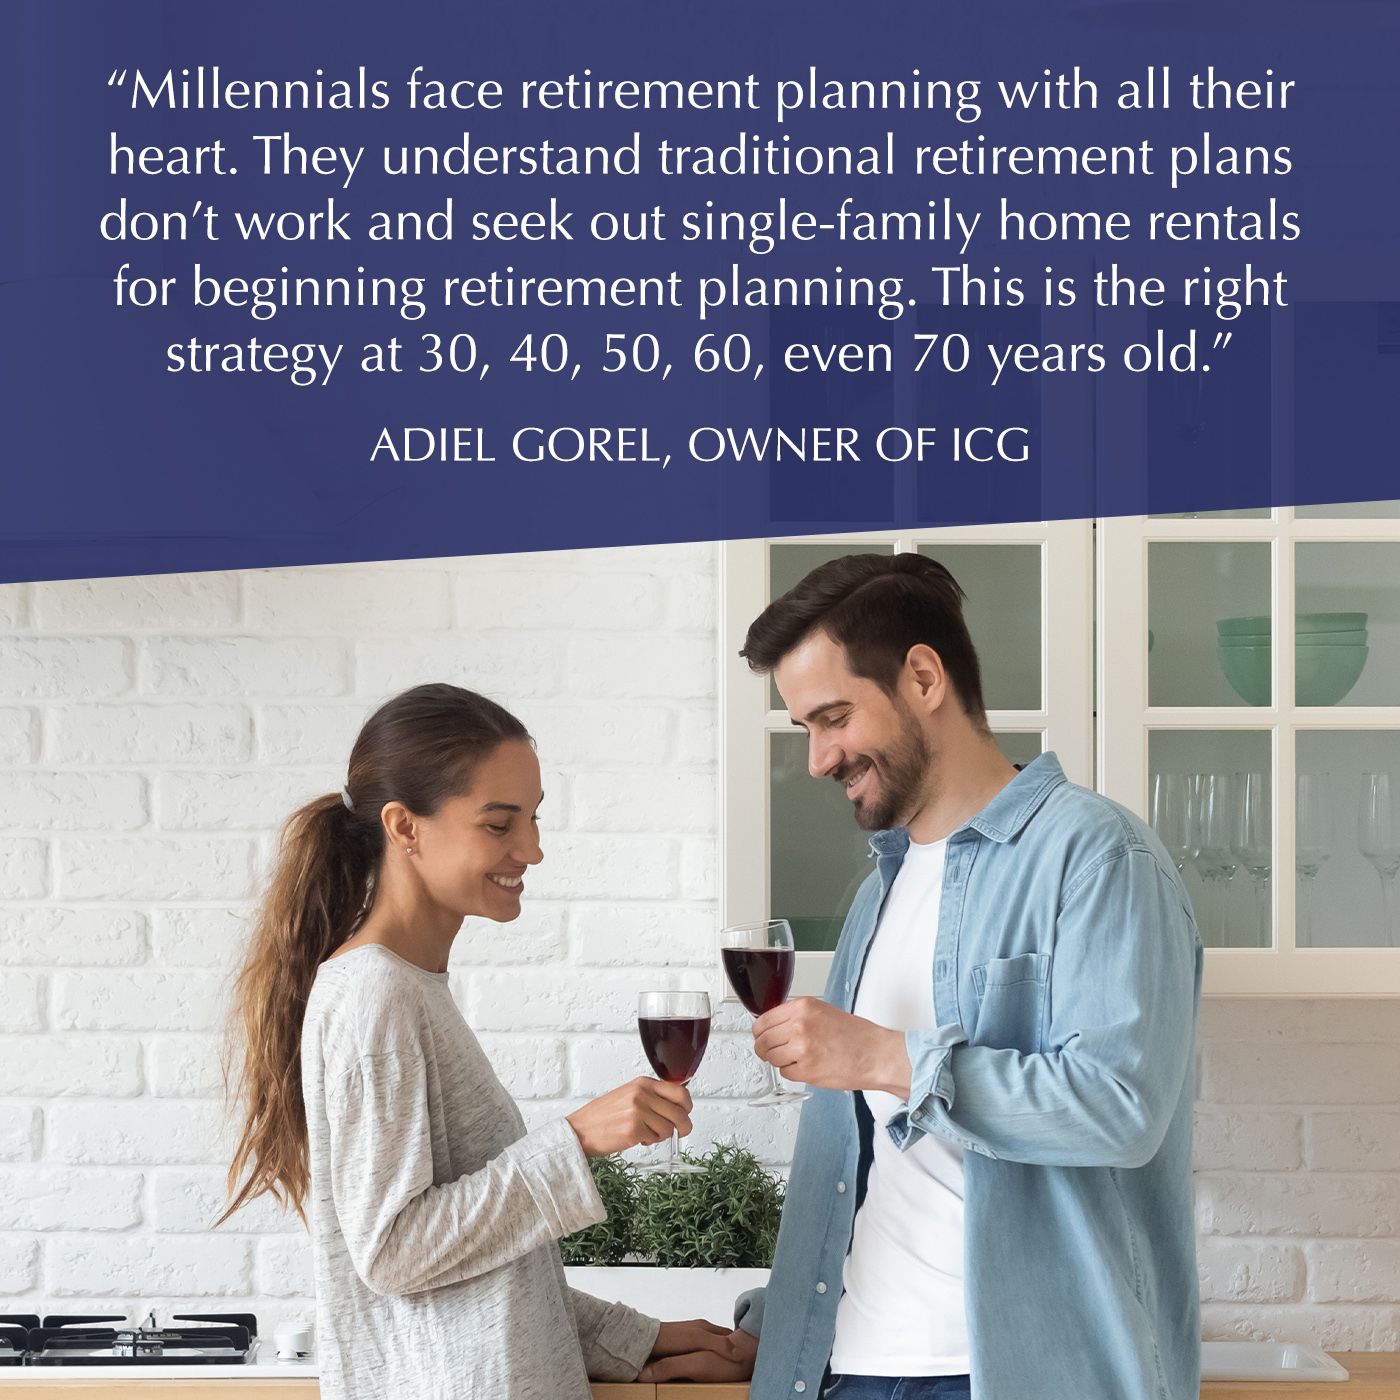 New Faster Retirement Plan Course for Millenials: Real Estate To Retire Event